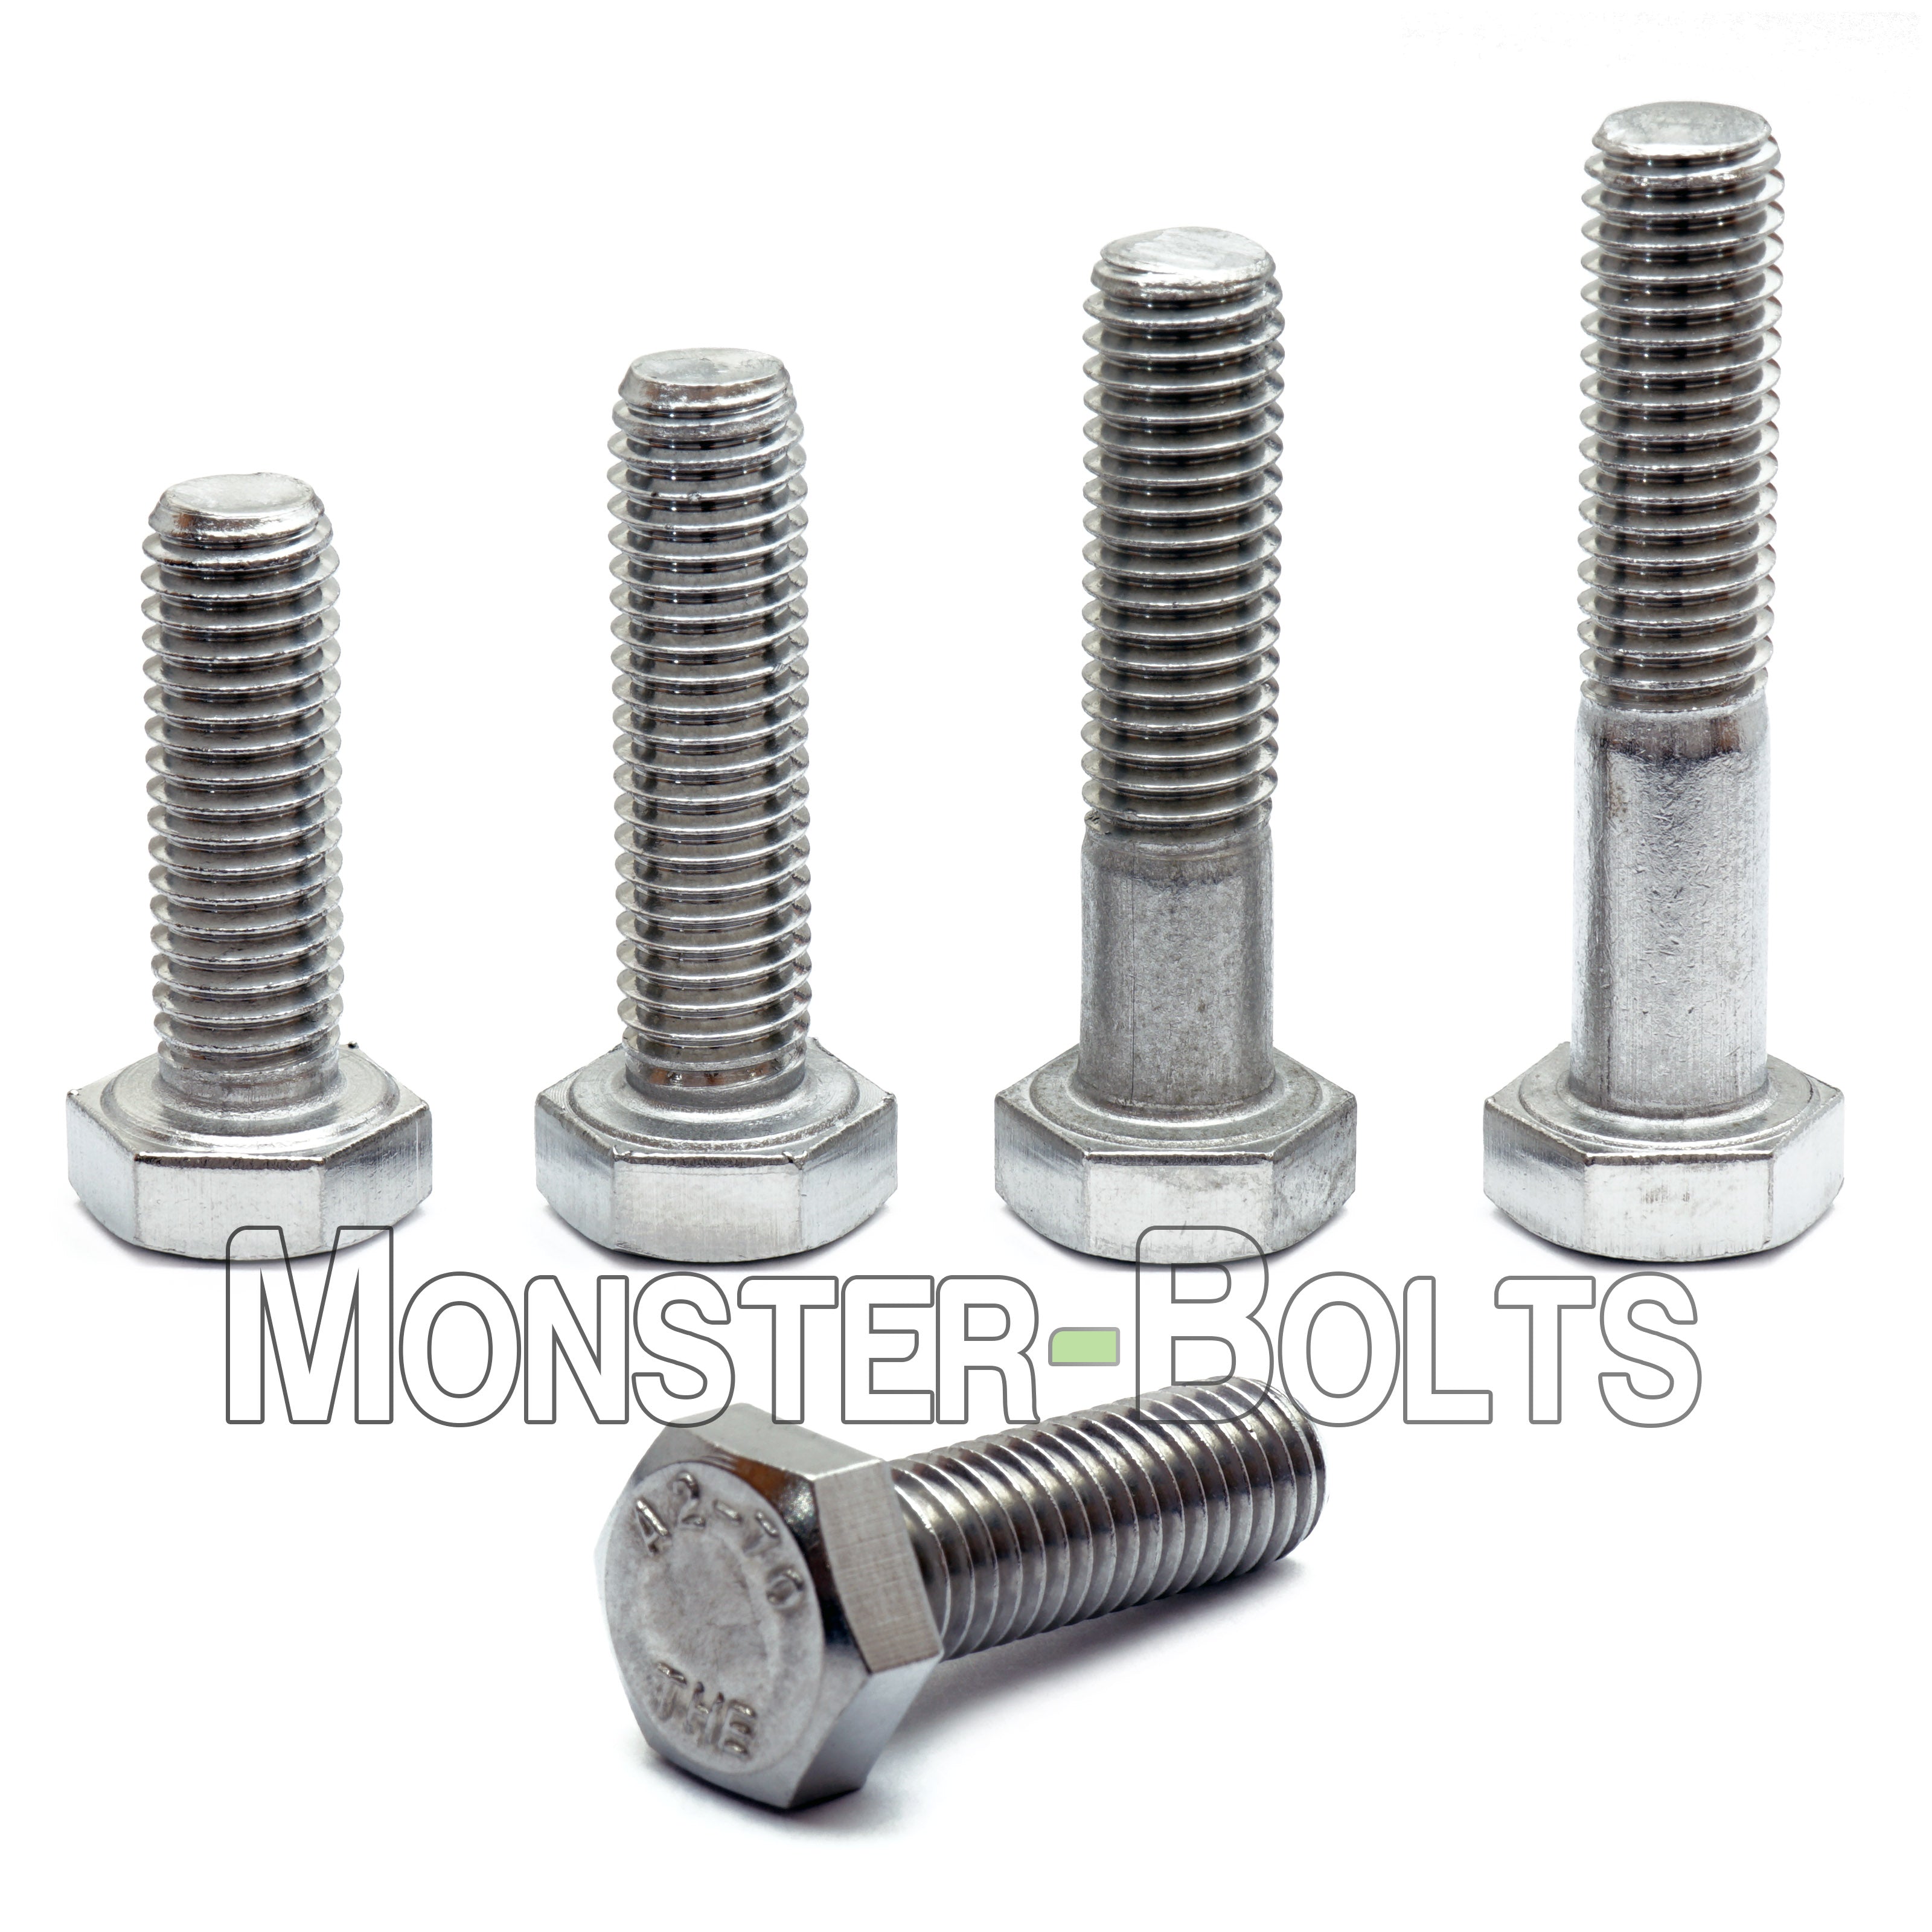 Details about   M6-1.00-40mm Metric Hex tap bolts Stainless steel 18-8 A-2 10 pcs 